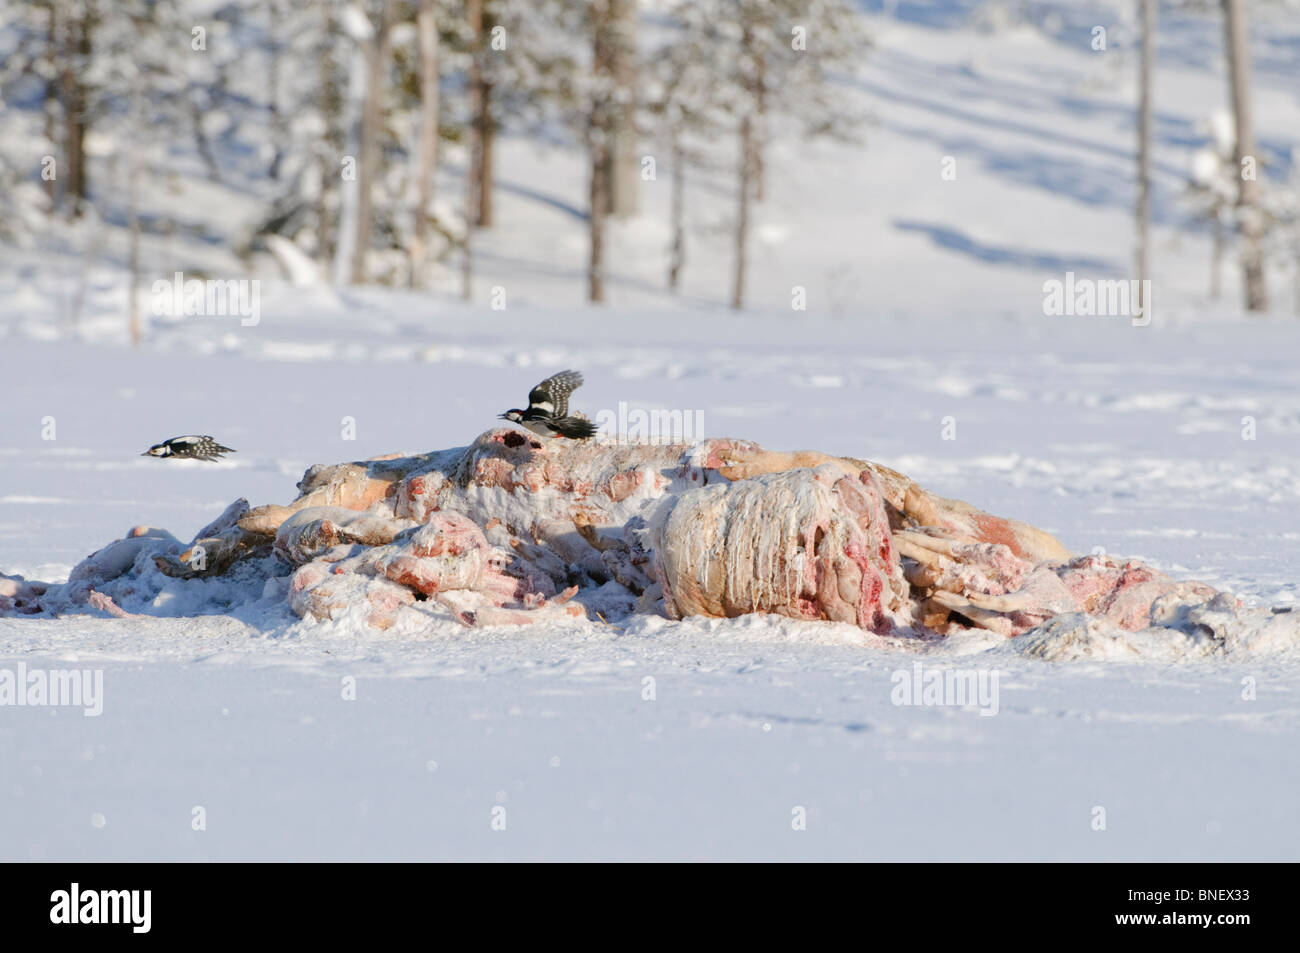 Great Spotted Woodpeckers (Dendrocopos major) feeding on a pile of pig (Sus scrofa) carcasses dumped in snow for baiting Eurasian Wolves (Canis lupus), Kuhmo, Finland, near the Russian border, February Stock Photo